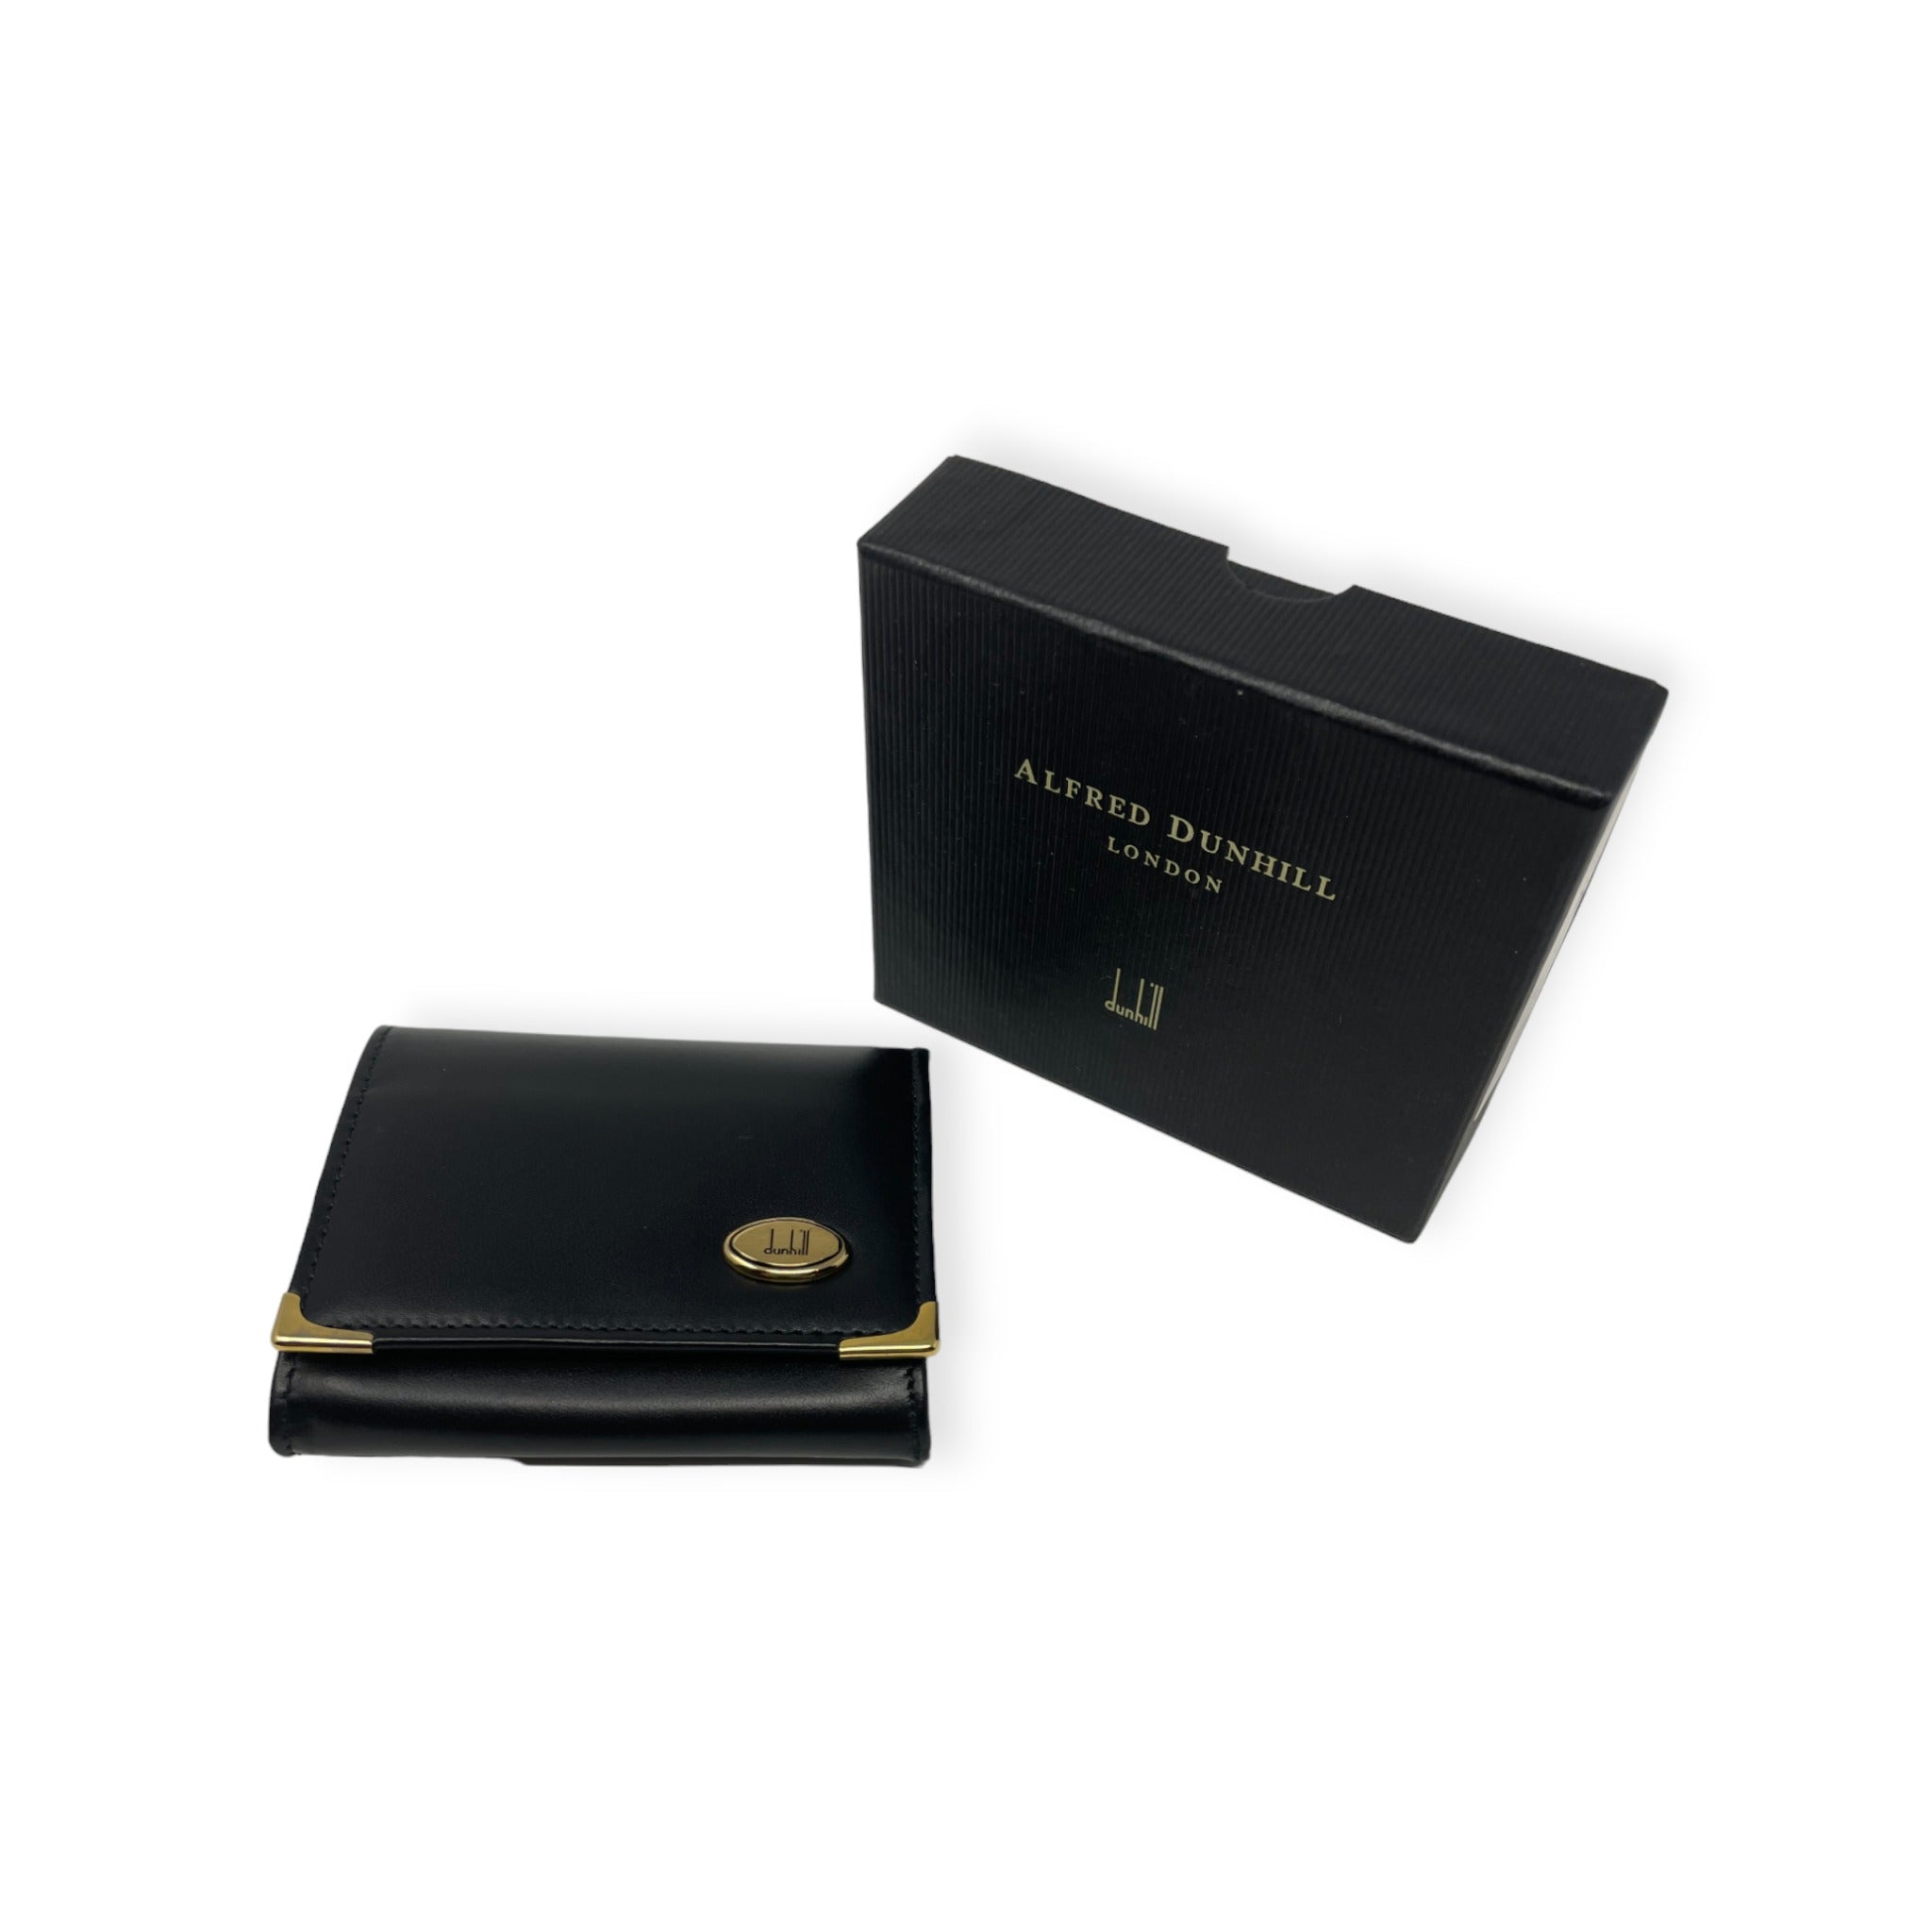 Side view of Dunhill change wallet with gift box